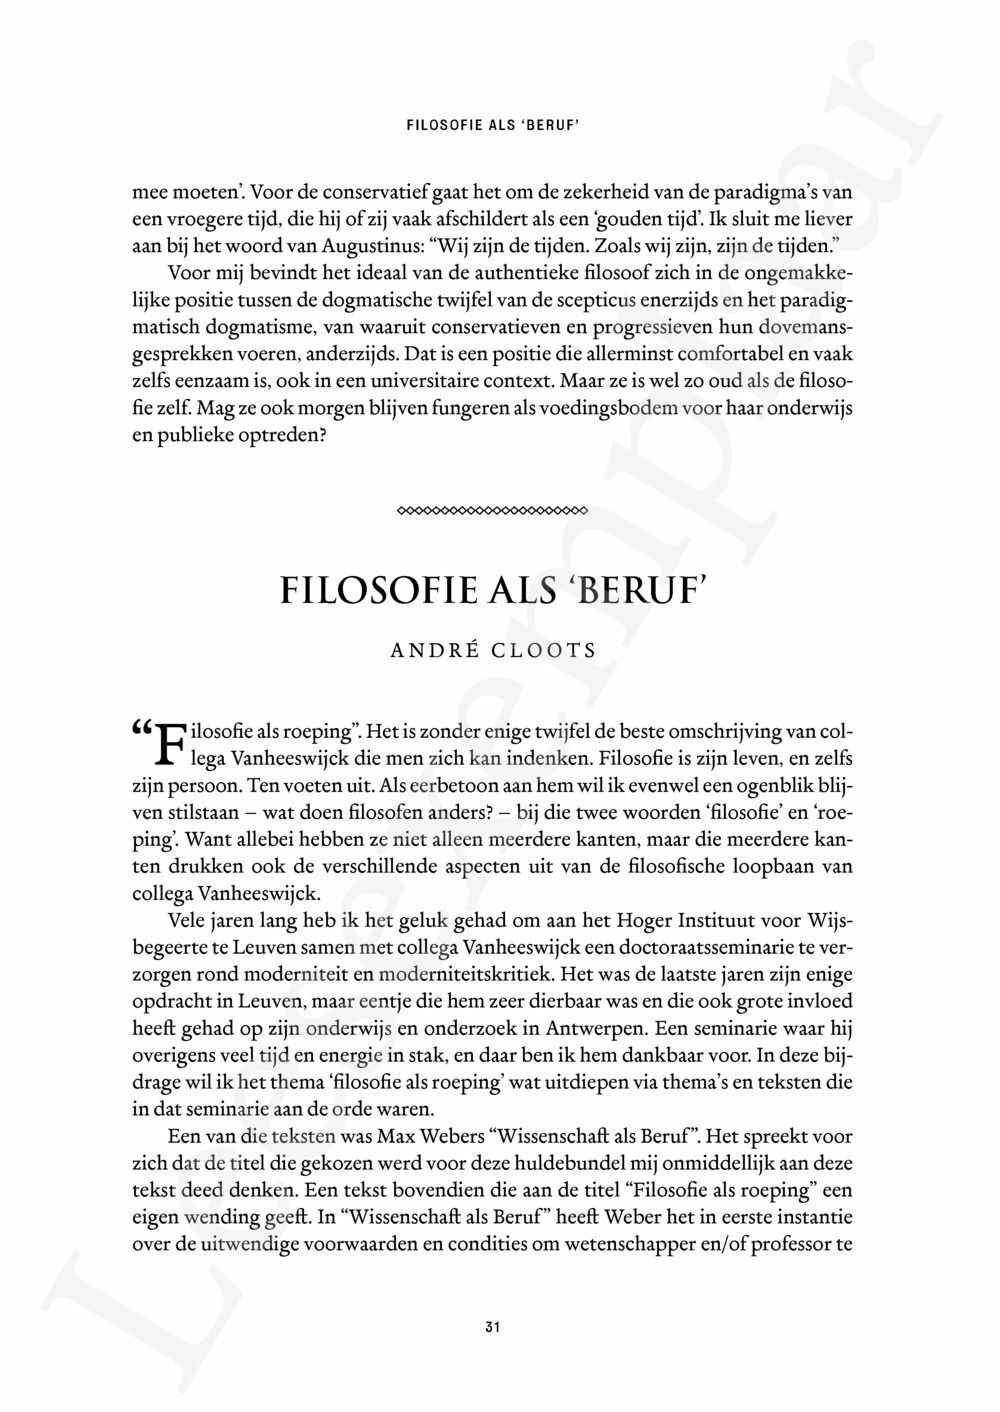 Preview: Filosofie als roeping